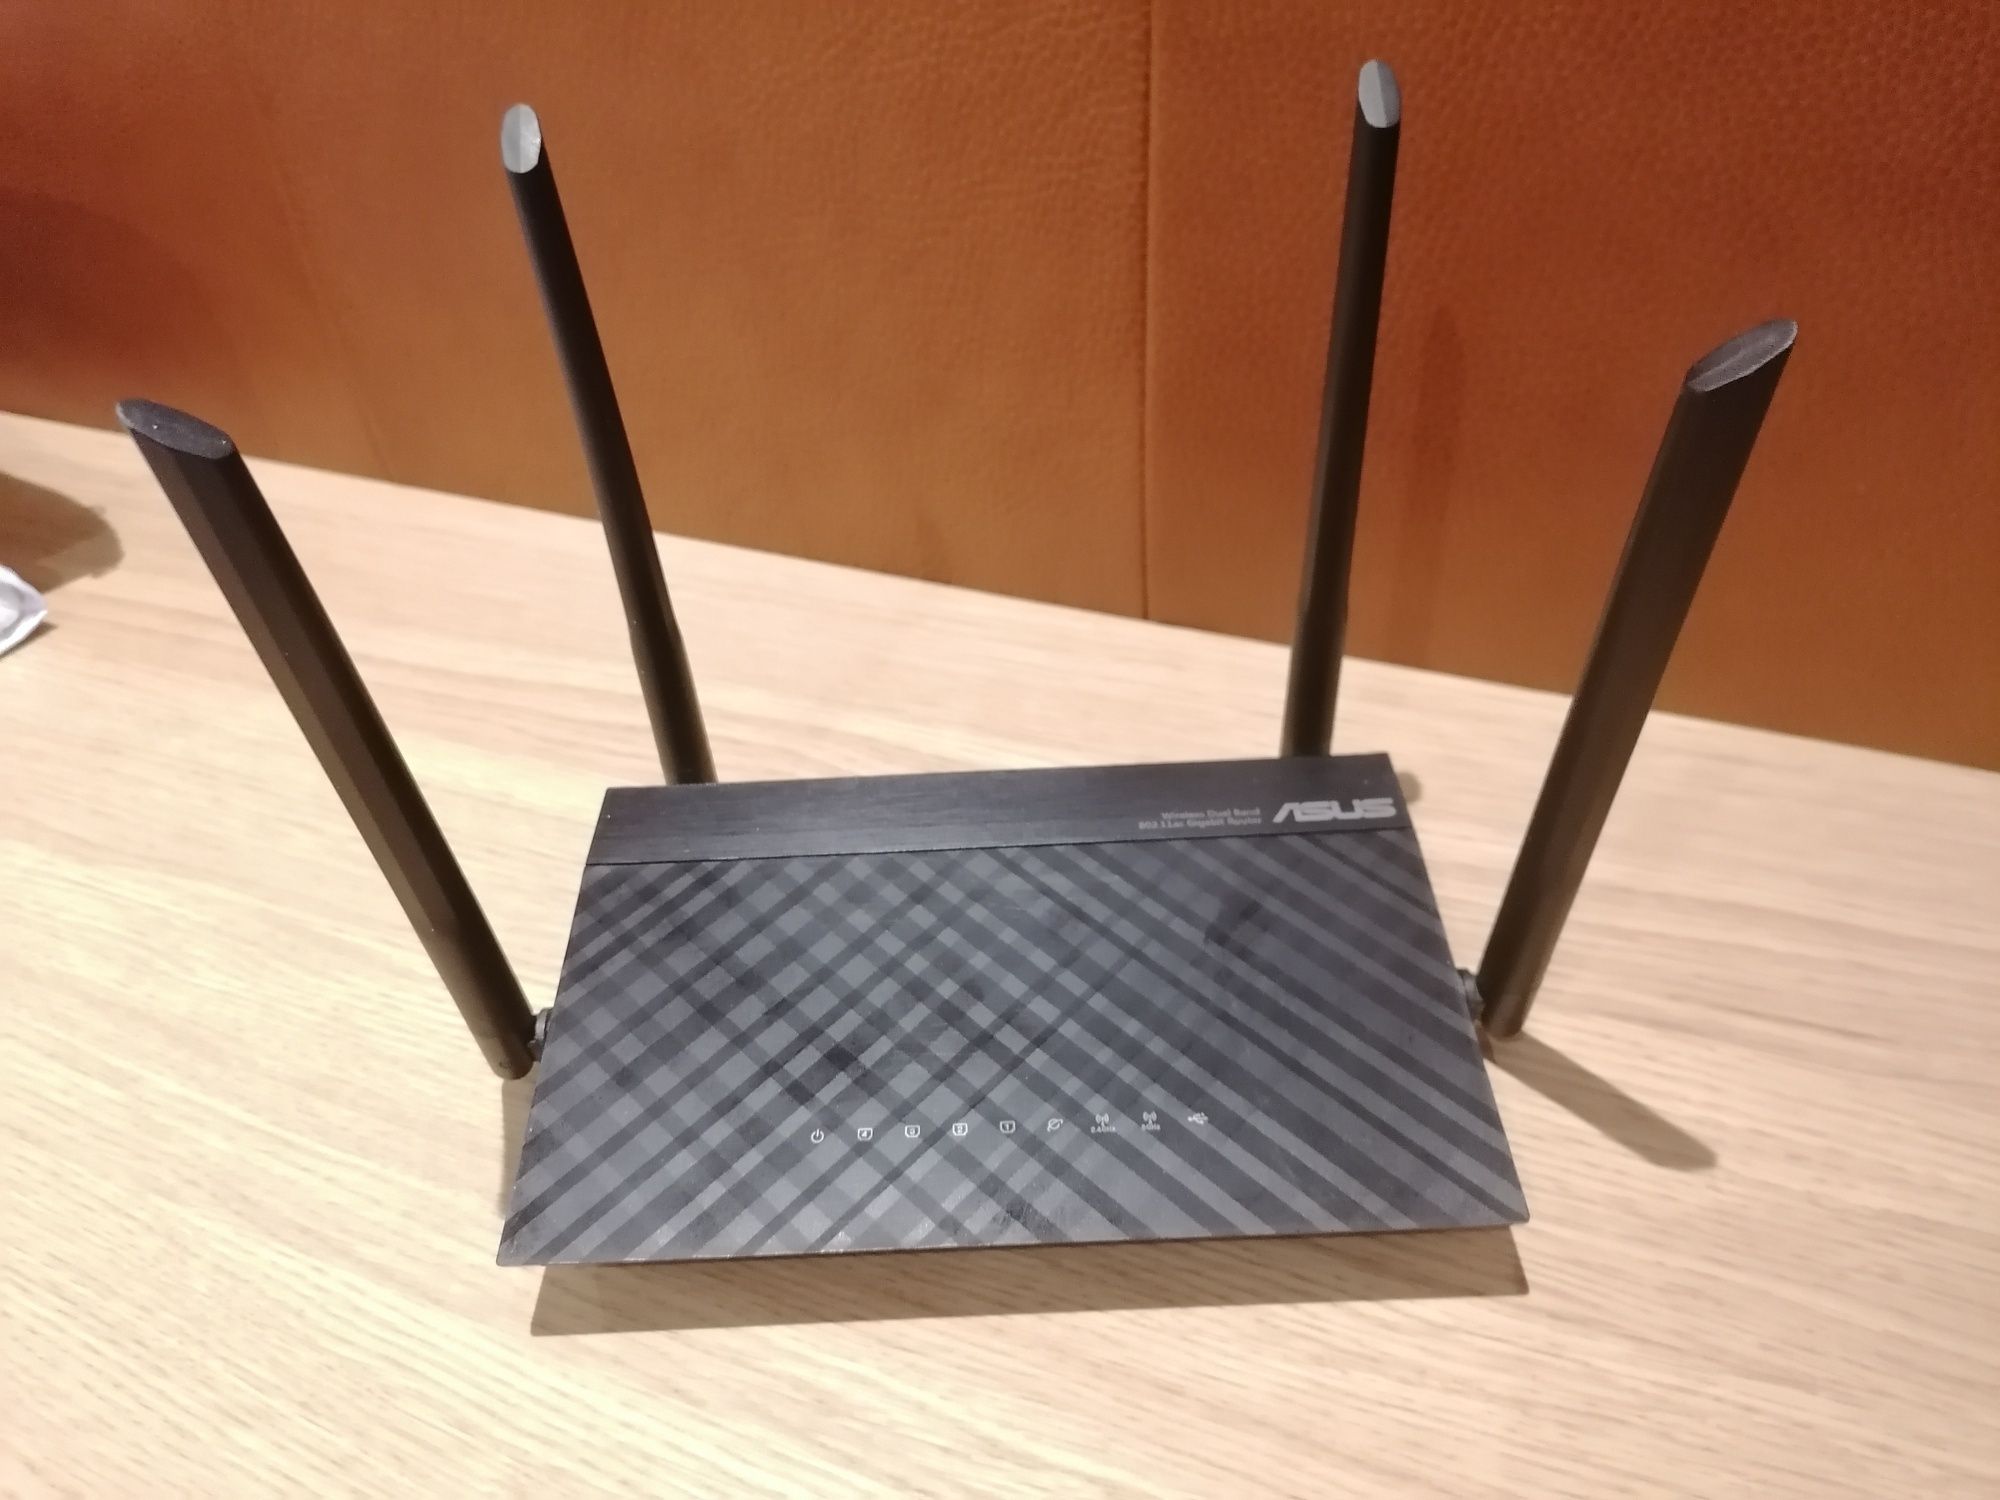 Router Asus RT-AC58U